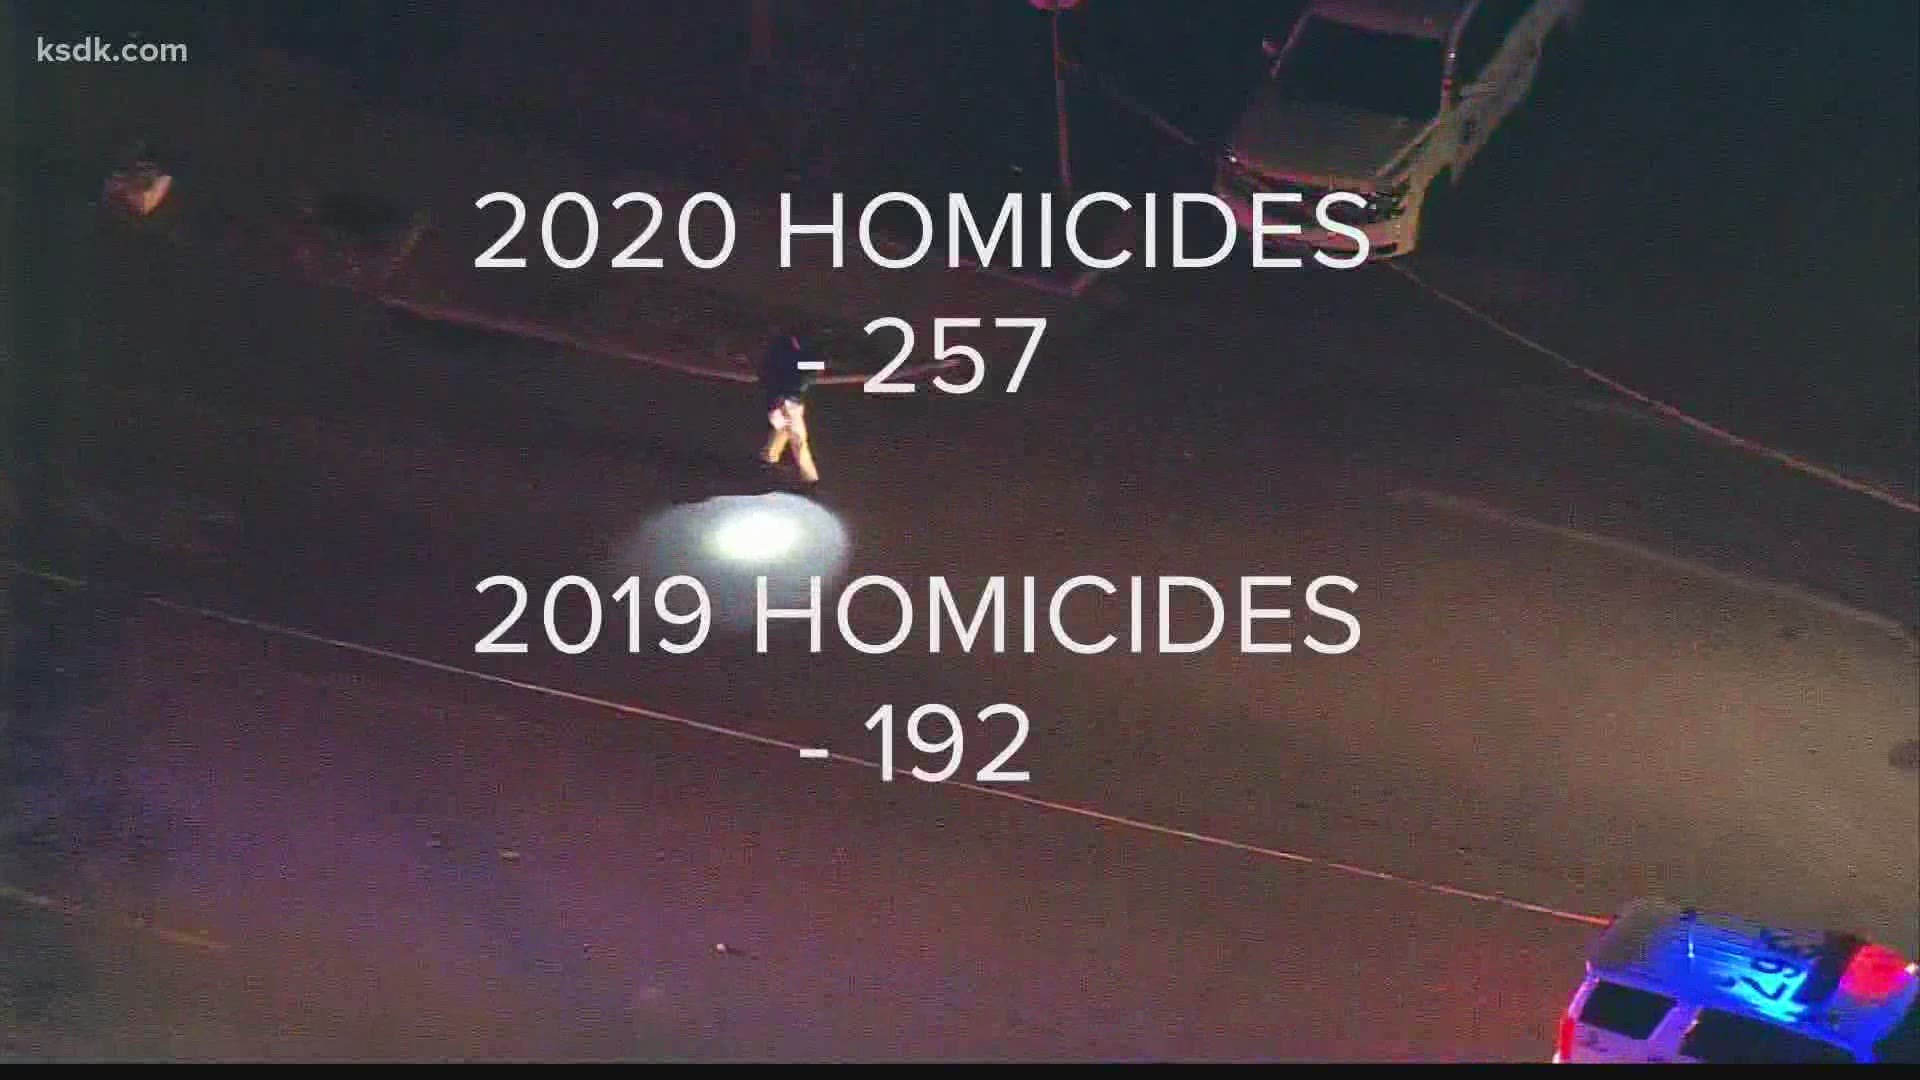 A man was found shot to death Christmas Eve morning in south city, marking St. Louis' 255th homicide of 2020.